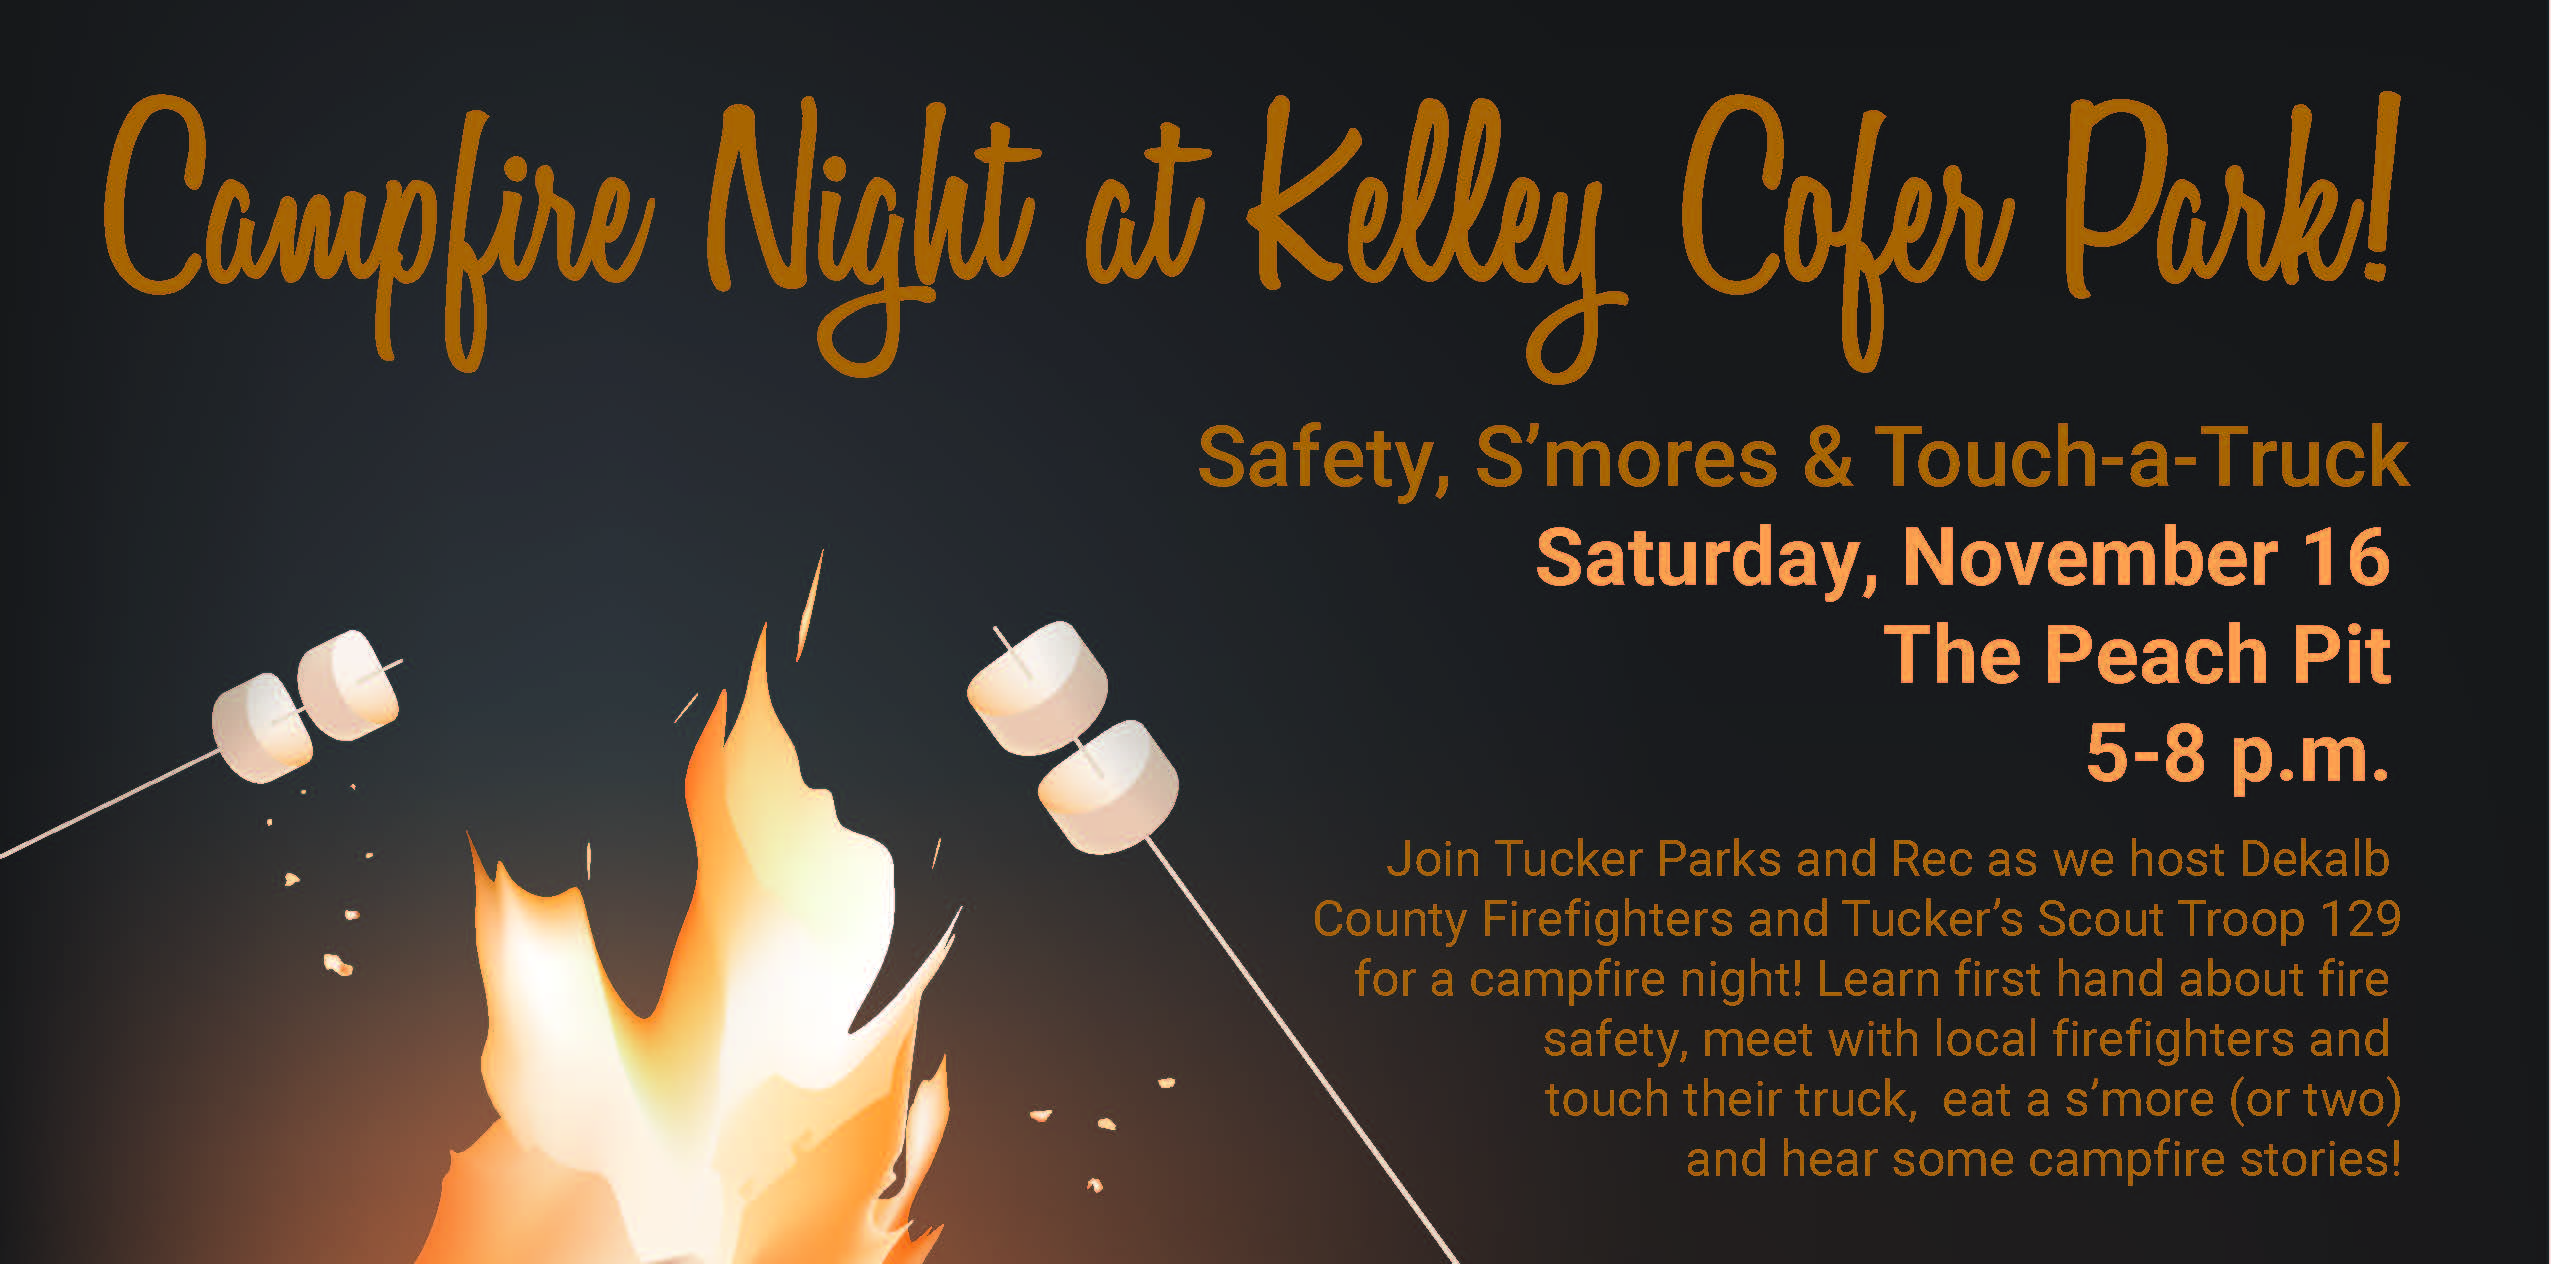 Graphic depicting roasting marshmallows over a fire for for Campfire Night at Kelley Cofer Park, November 16.